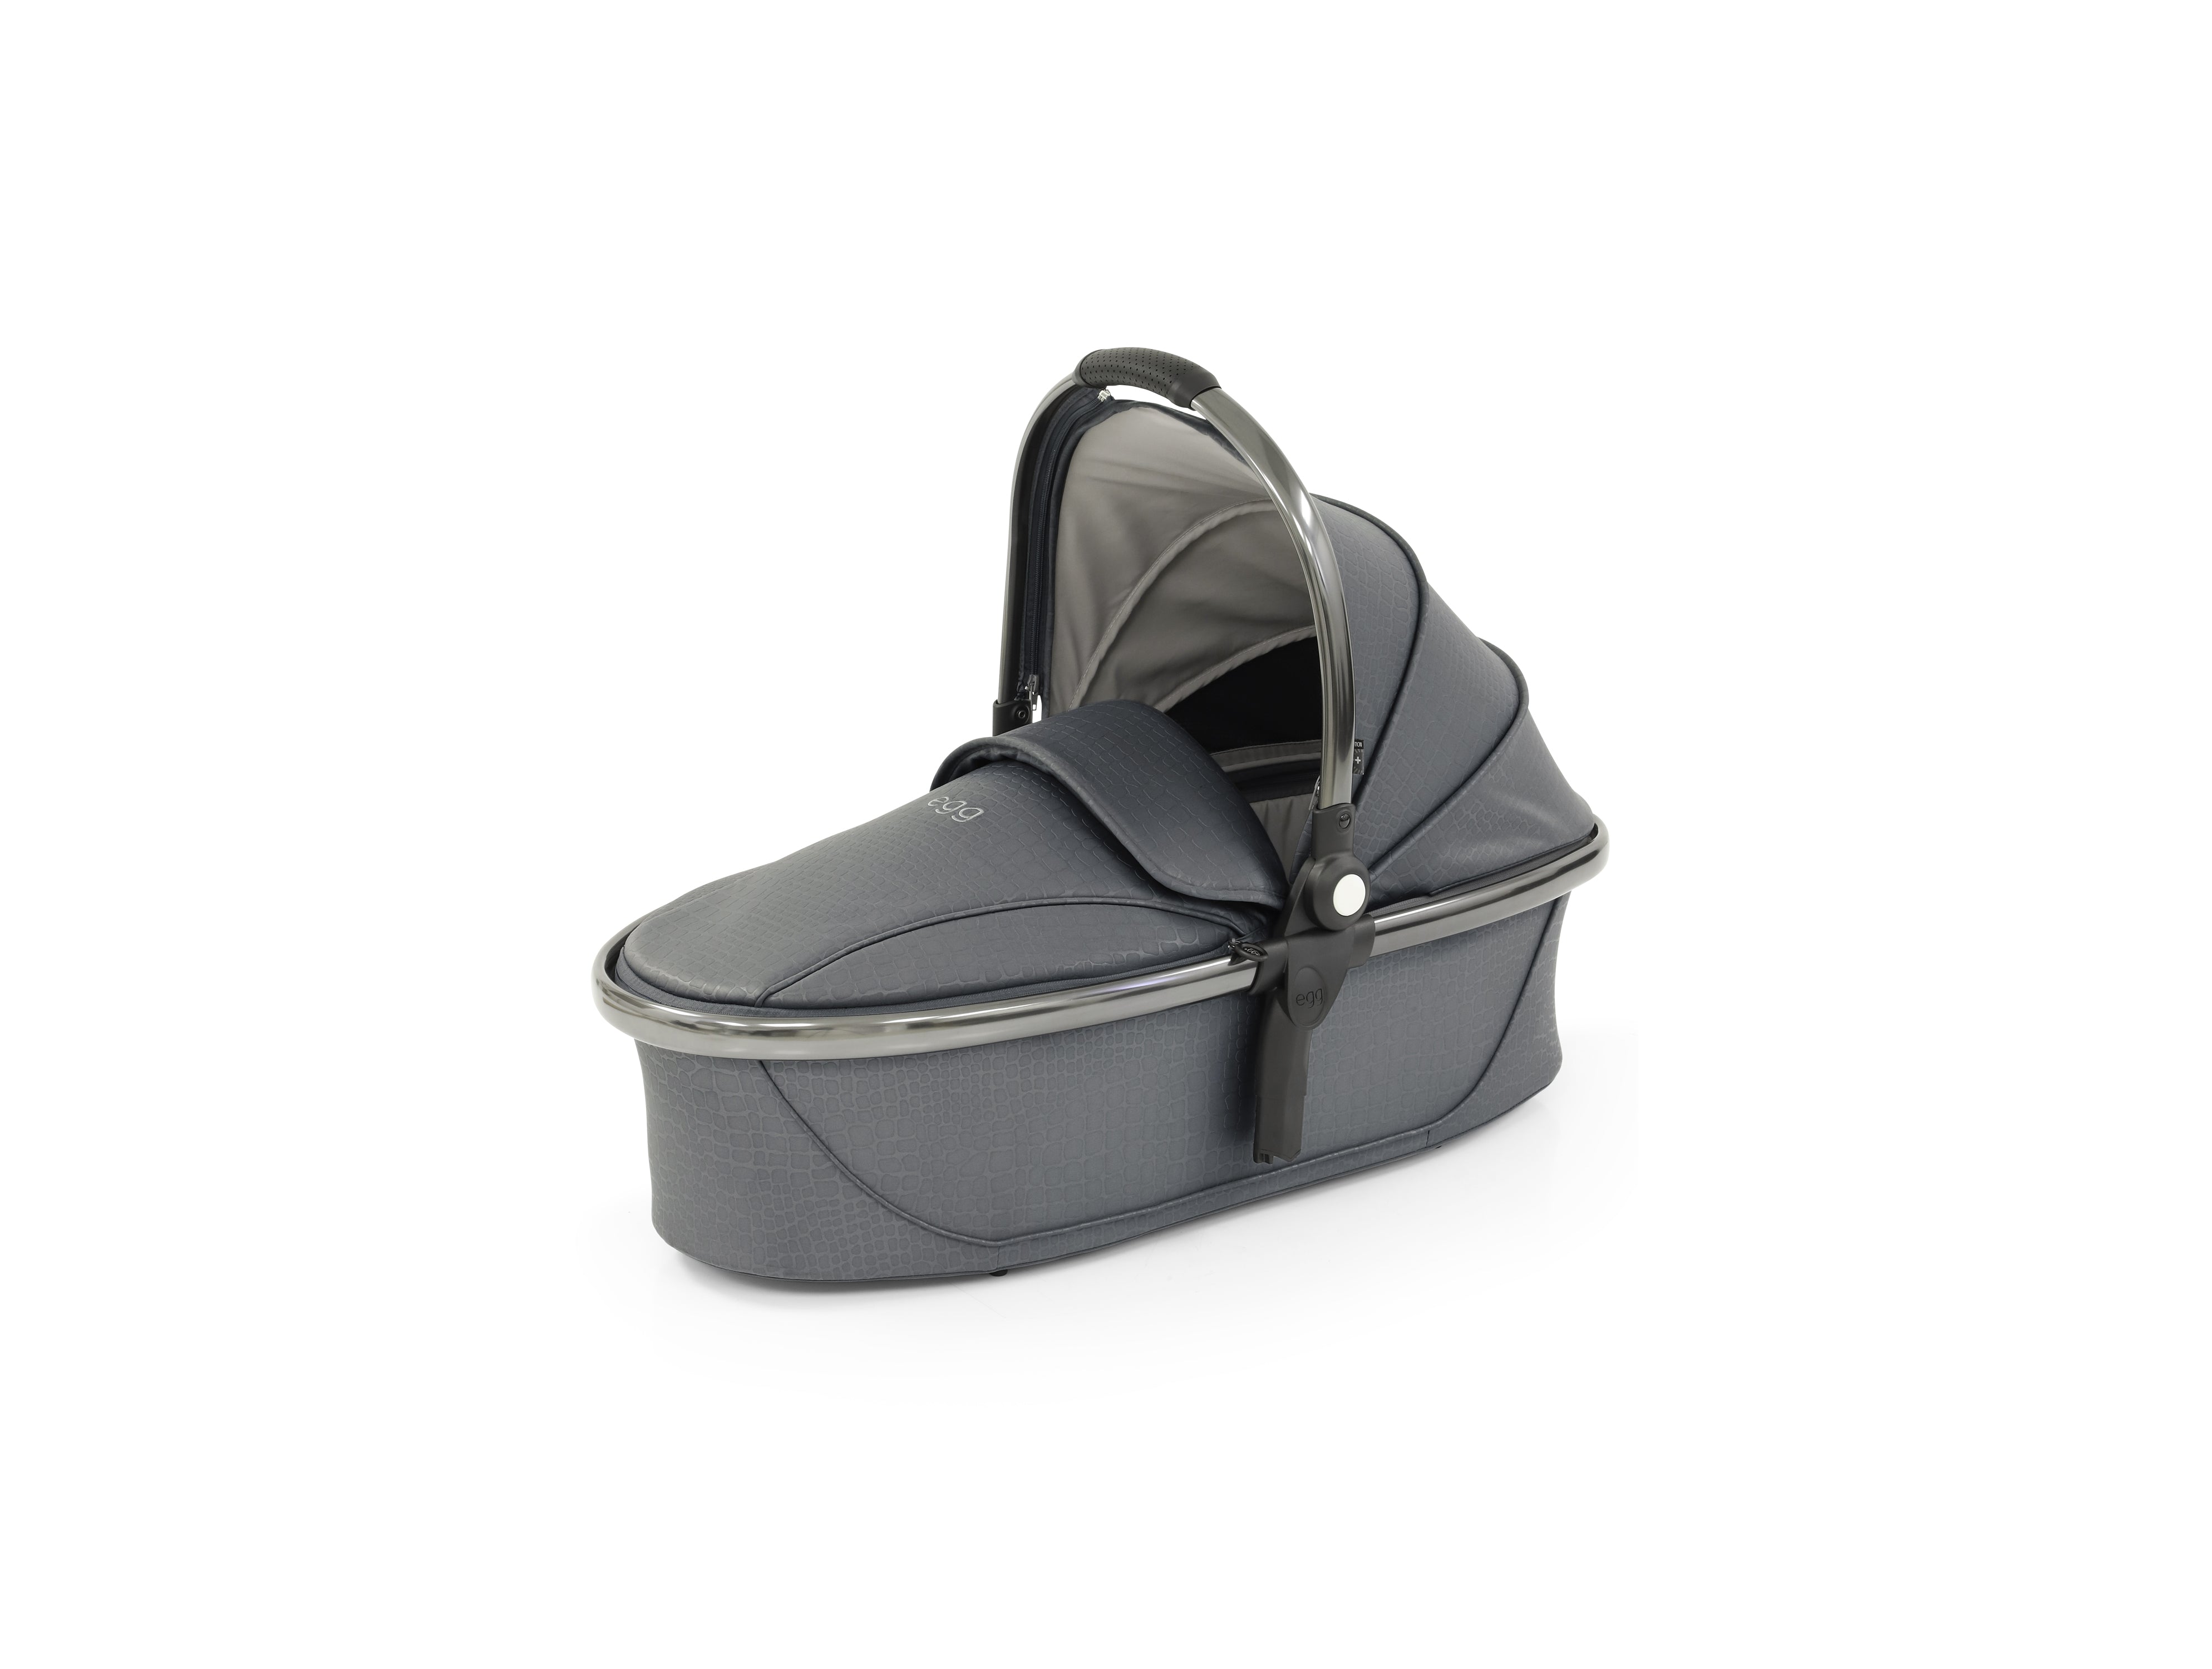 Egg 2 Carrycot Special Edition - Jurassic Grey